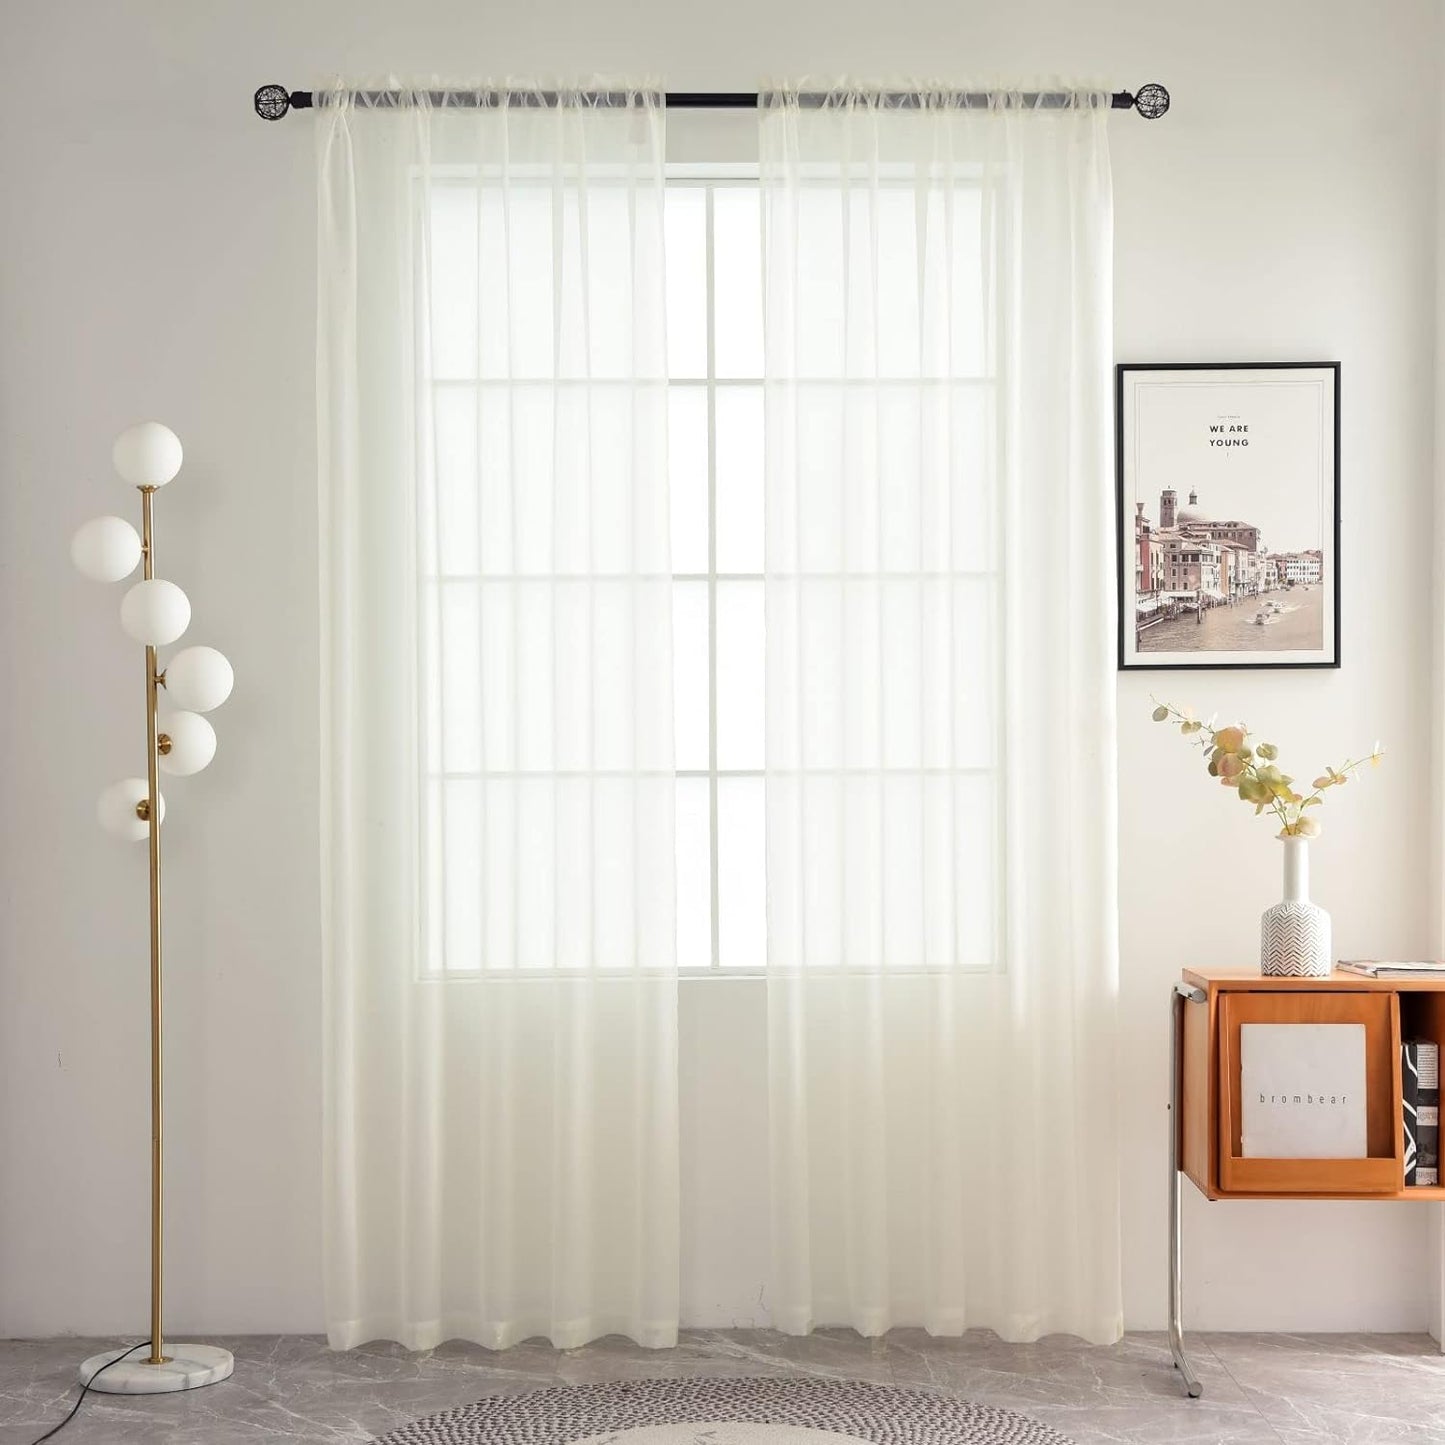 Spacedresser Basic Rod Pocket Sheer Voile Window Curtain Panels White 1 Pair 2 Panels 52 Width 84 Inch Long for Kitchen Bedroom Children Living Room Yard(White,52 W X 84 L)  Lucky Home Ivory 70 W X 72 L 